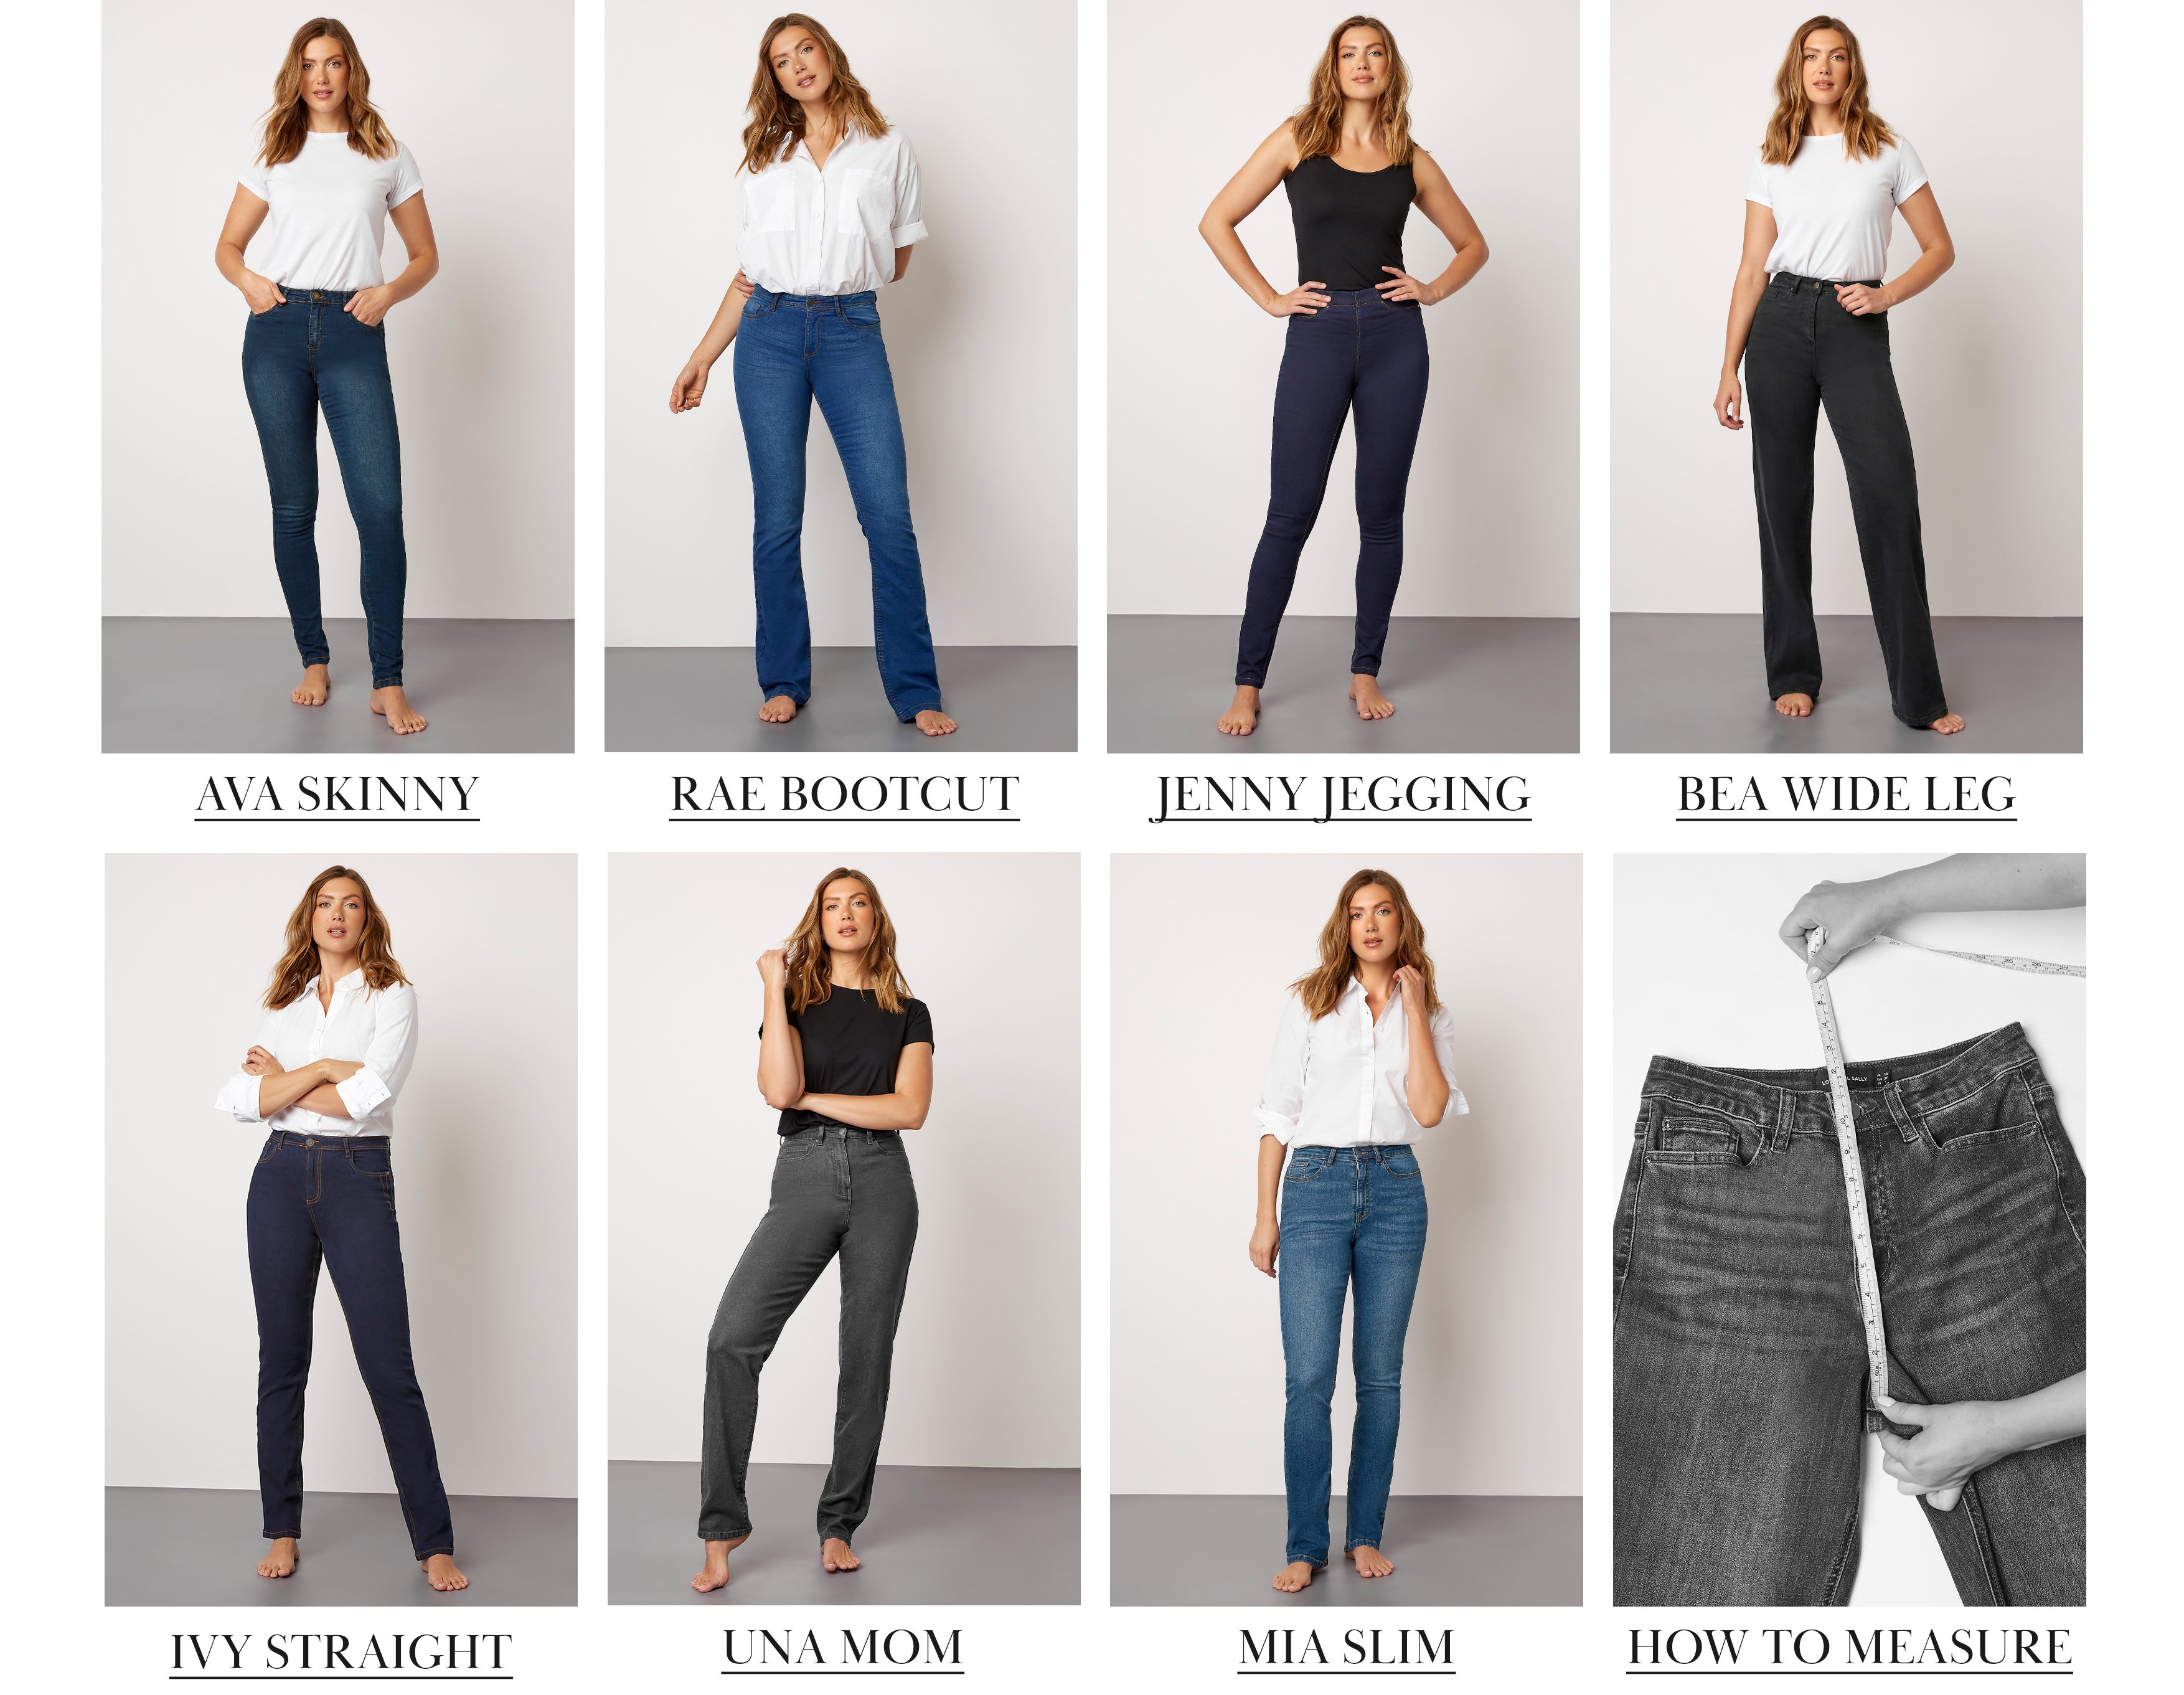 Women Jeans Fits Denim Female Pants Models Skinny Straight Slim  Boyfriend And Boot Cut Silhouette Styles Of Jean Trousers Vector Set  Girlish Casual Outfit As Baggy Flared Shorts Royalty Free SVG Cliparts